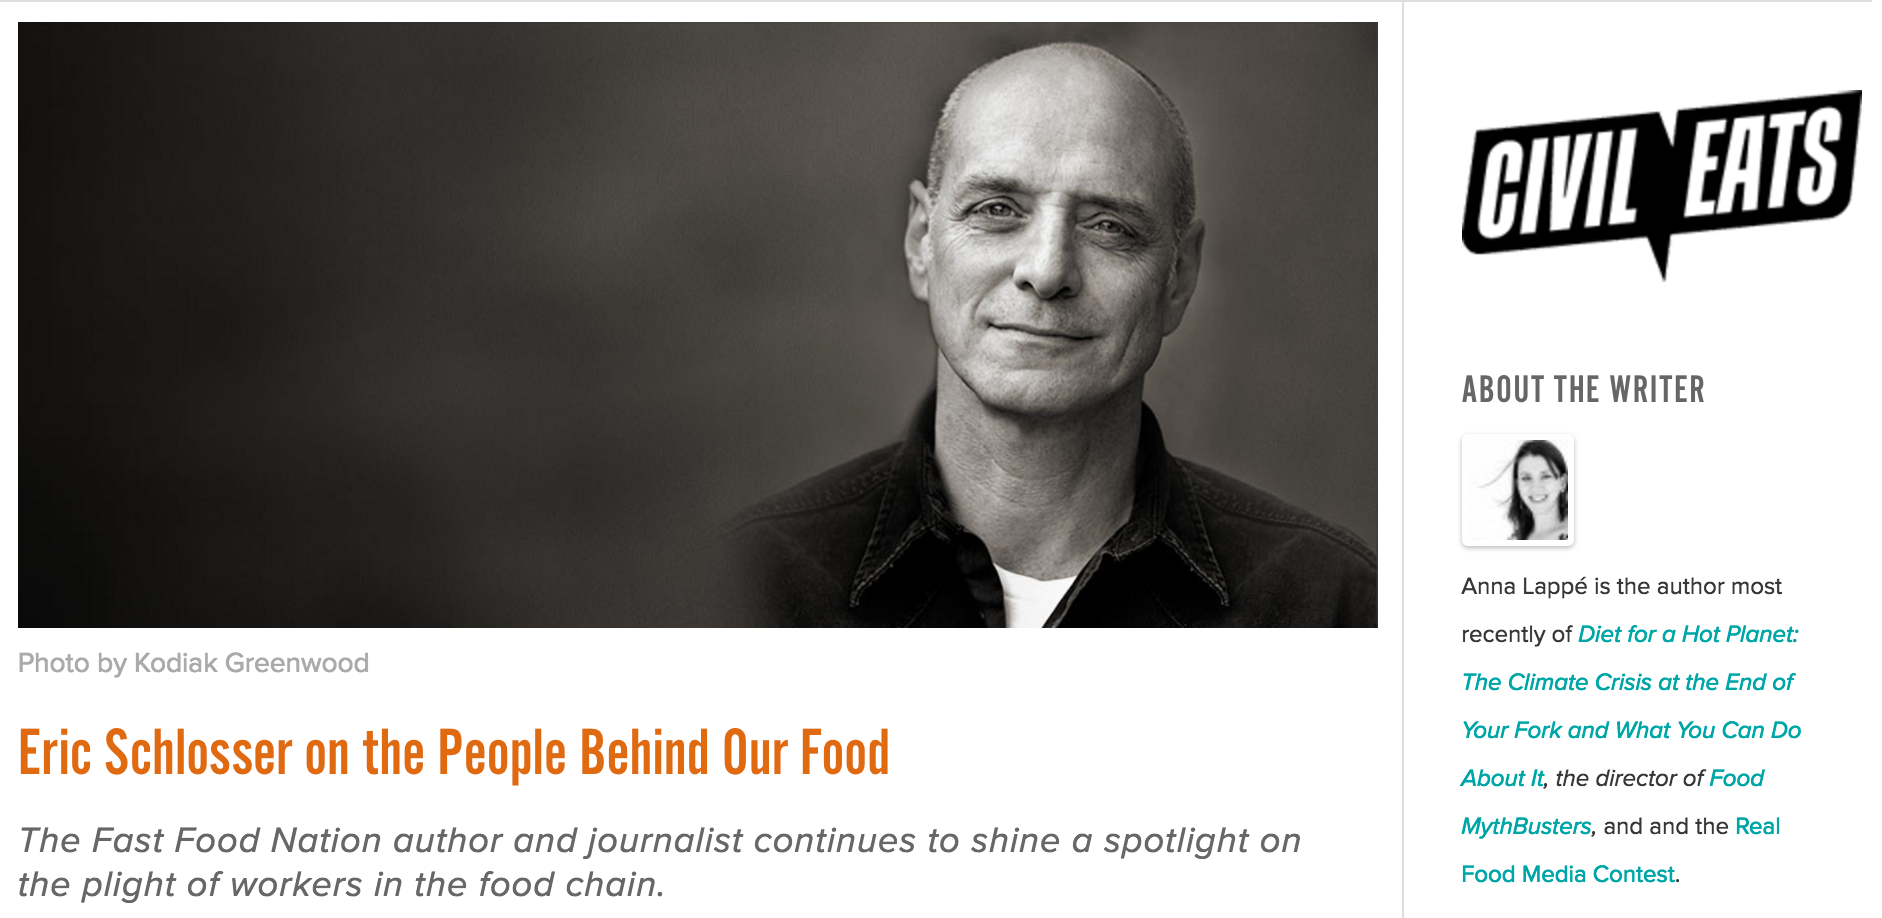 Civil Eats: Eric Schlosser on the People Behind Our Food